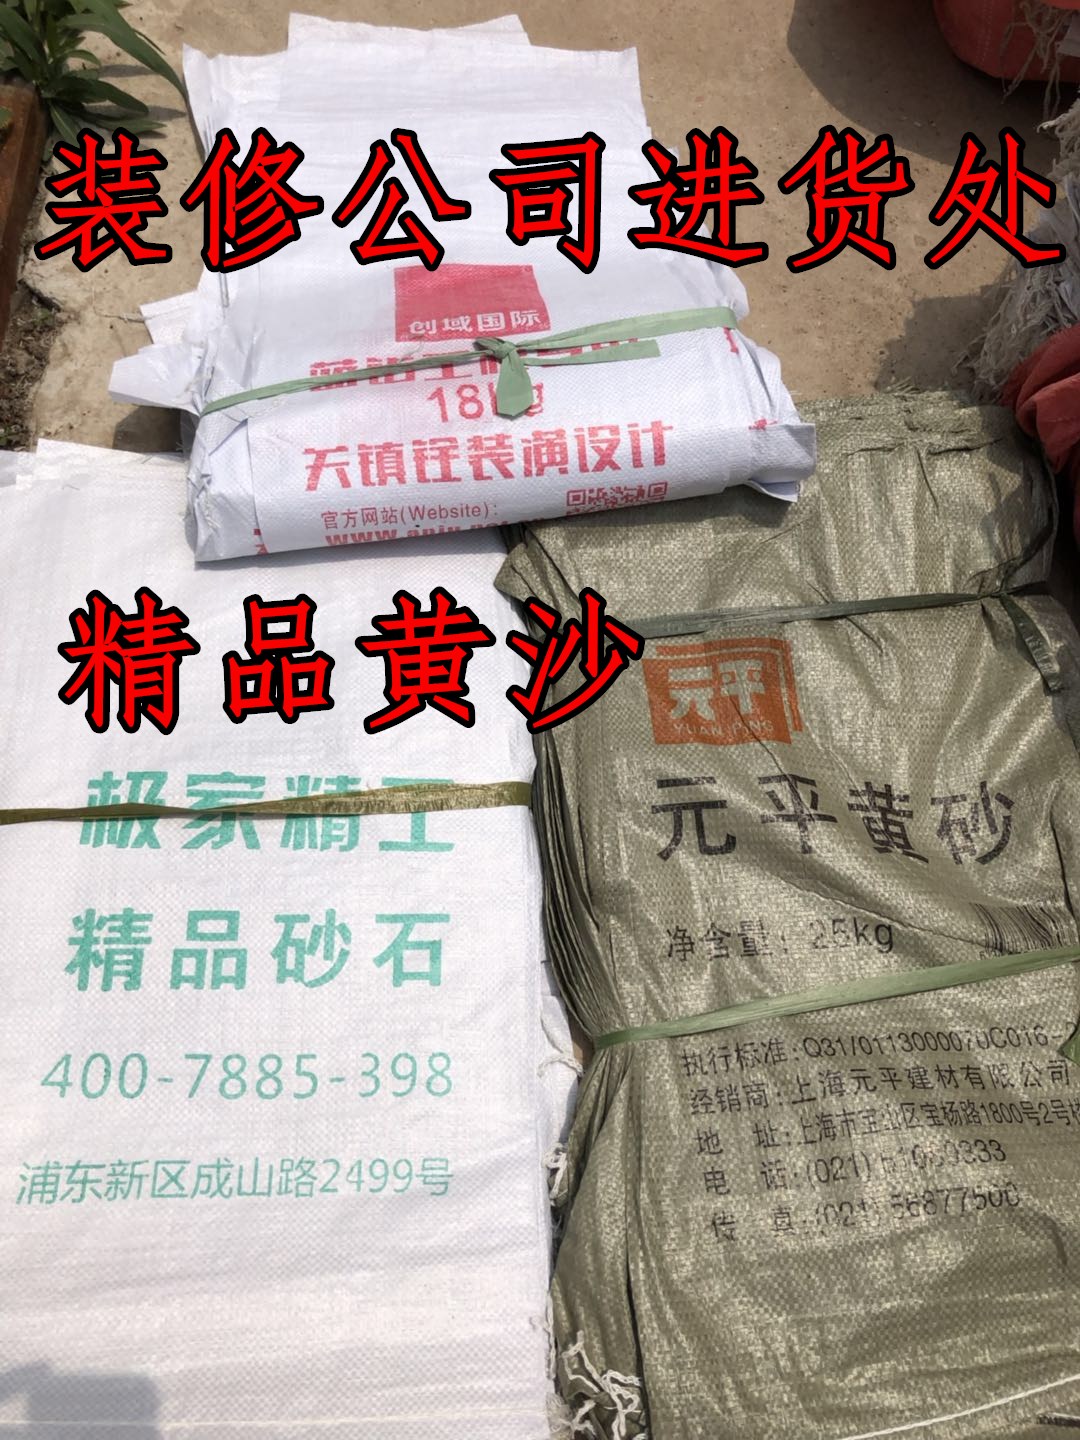 Shanghai coarse sand about 40 pounds free shipping delivery upstairs Huangsha cement bricks